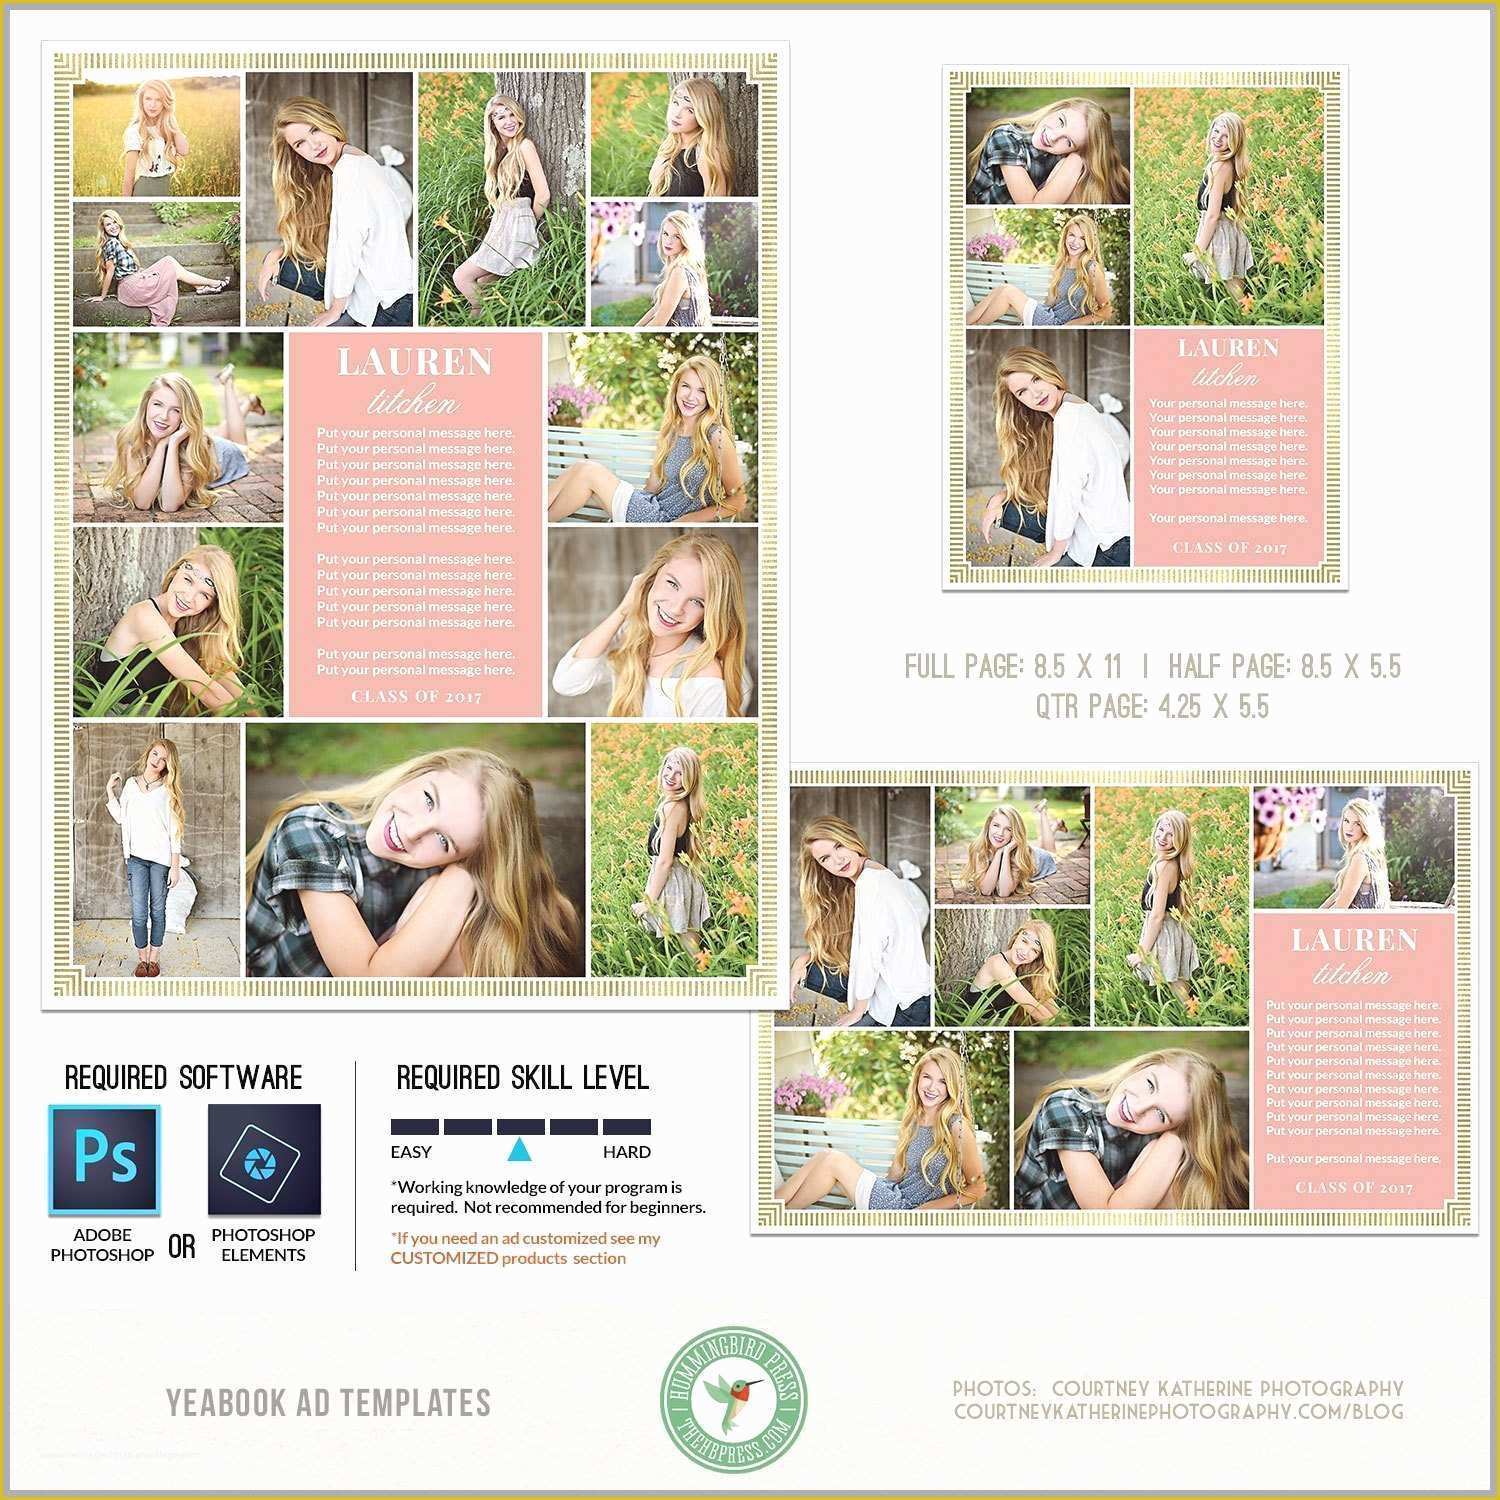 Yearbook Templates Free Download Of 63 Fresh Models Yearbook Templates Free Download